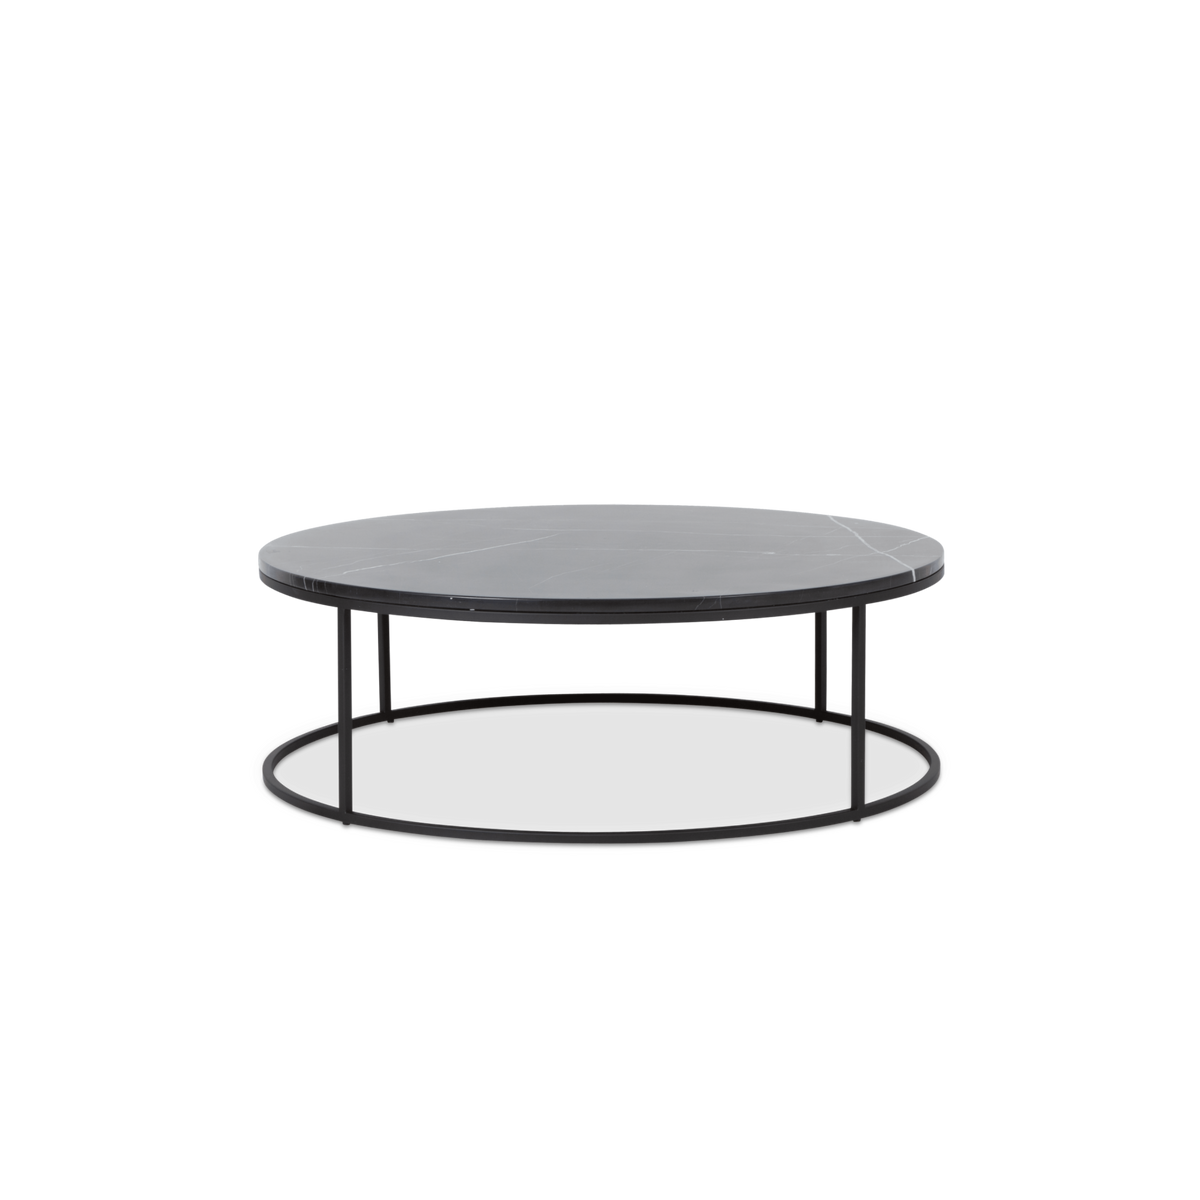 The timeless elegance of black marble makes this coffee table a statement piece.